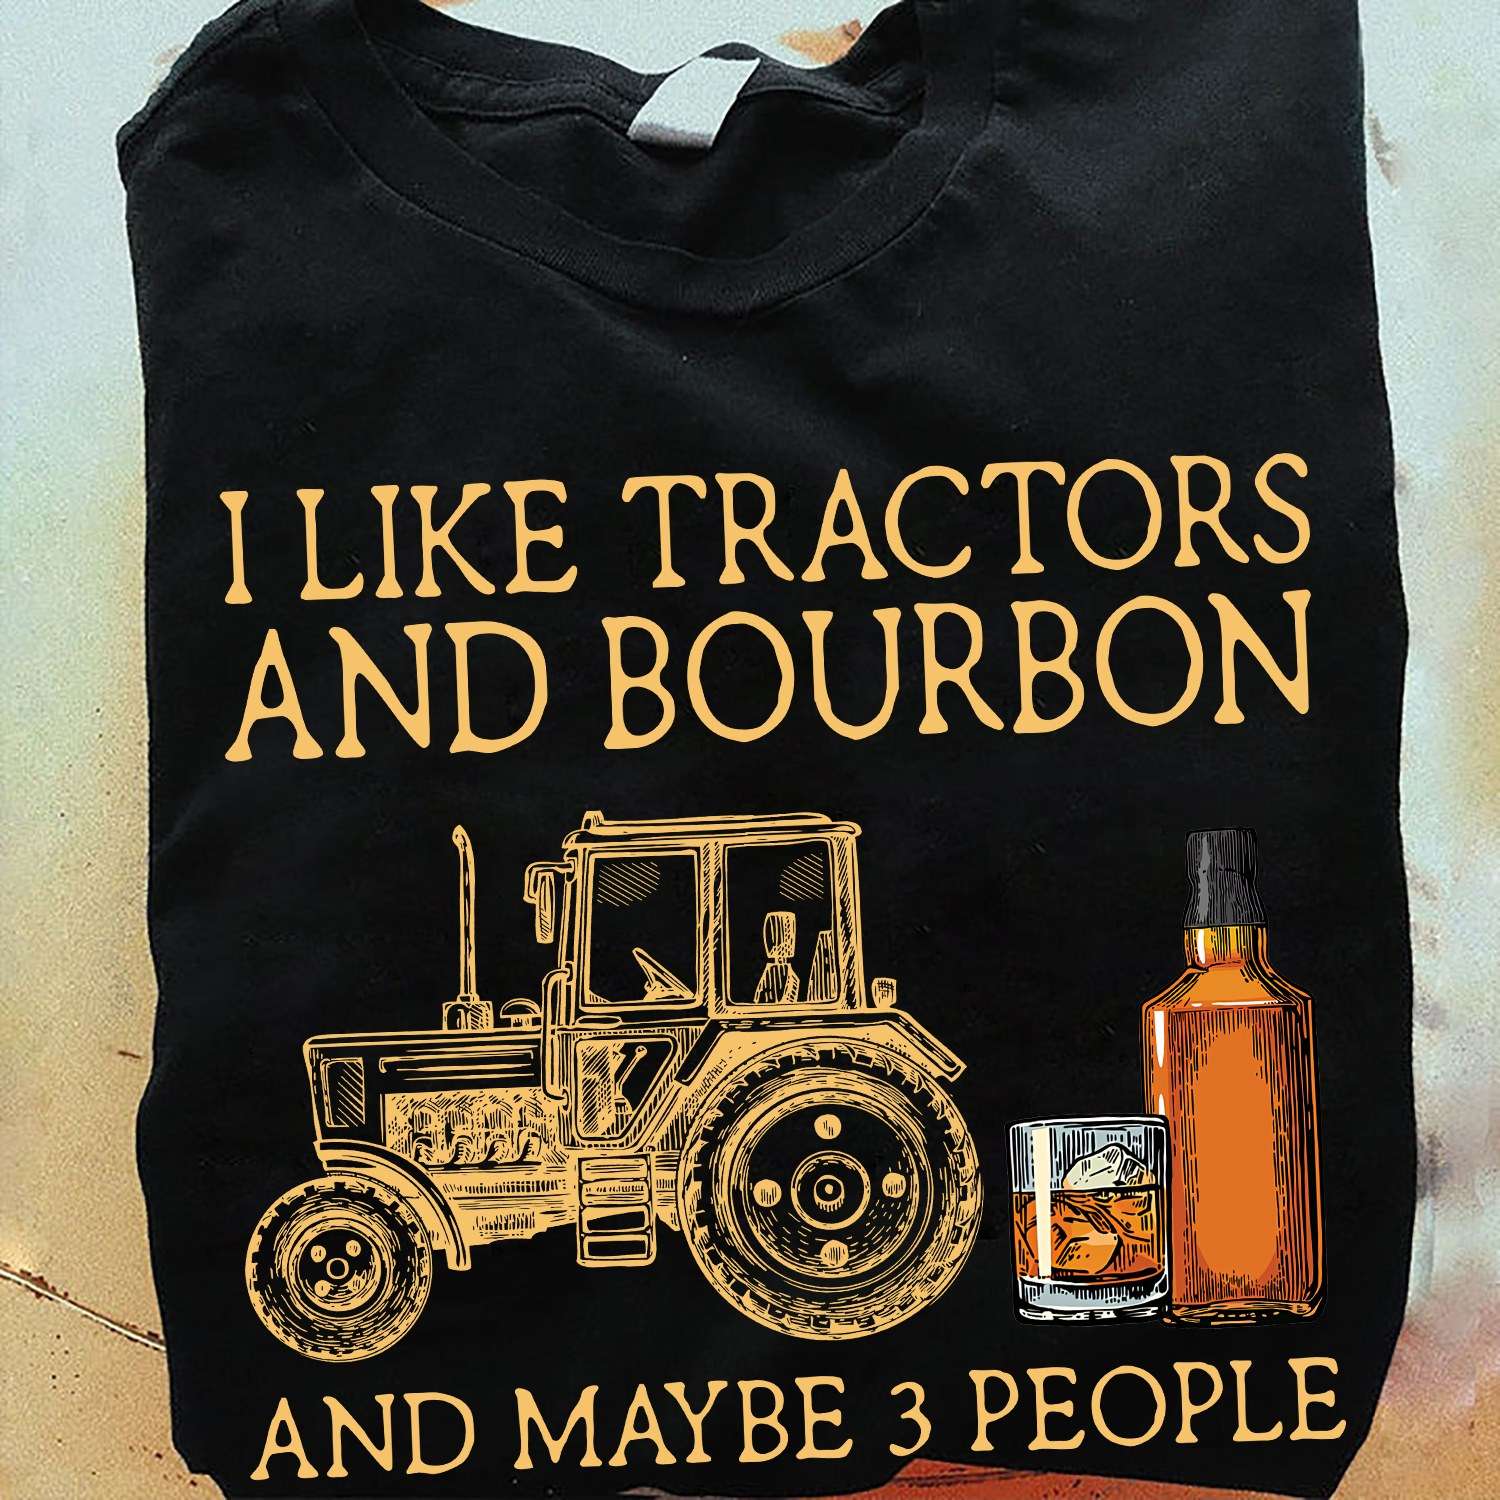 Tractors Bourbon - I like tractors and bourbon and maybe 3 people